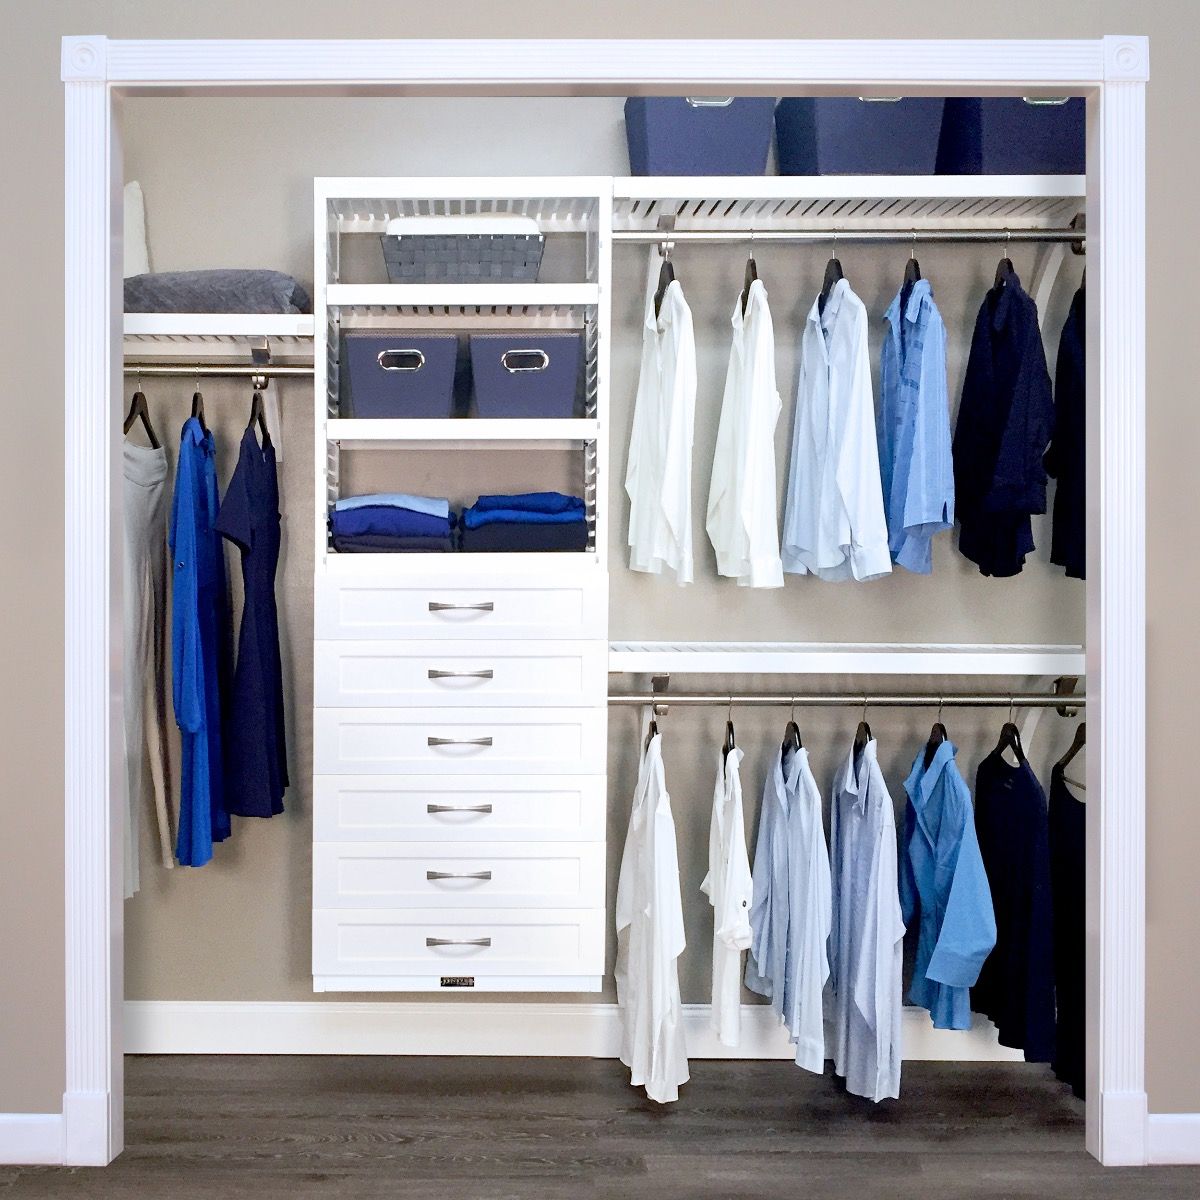 16in. Deep Woodcrest White Deluxe Closet Organizer with 6 drawers